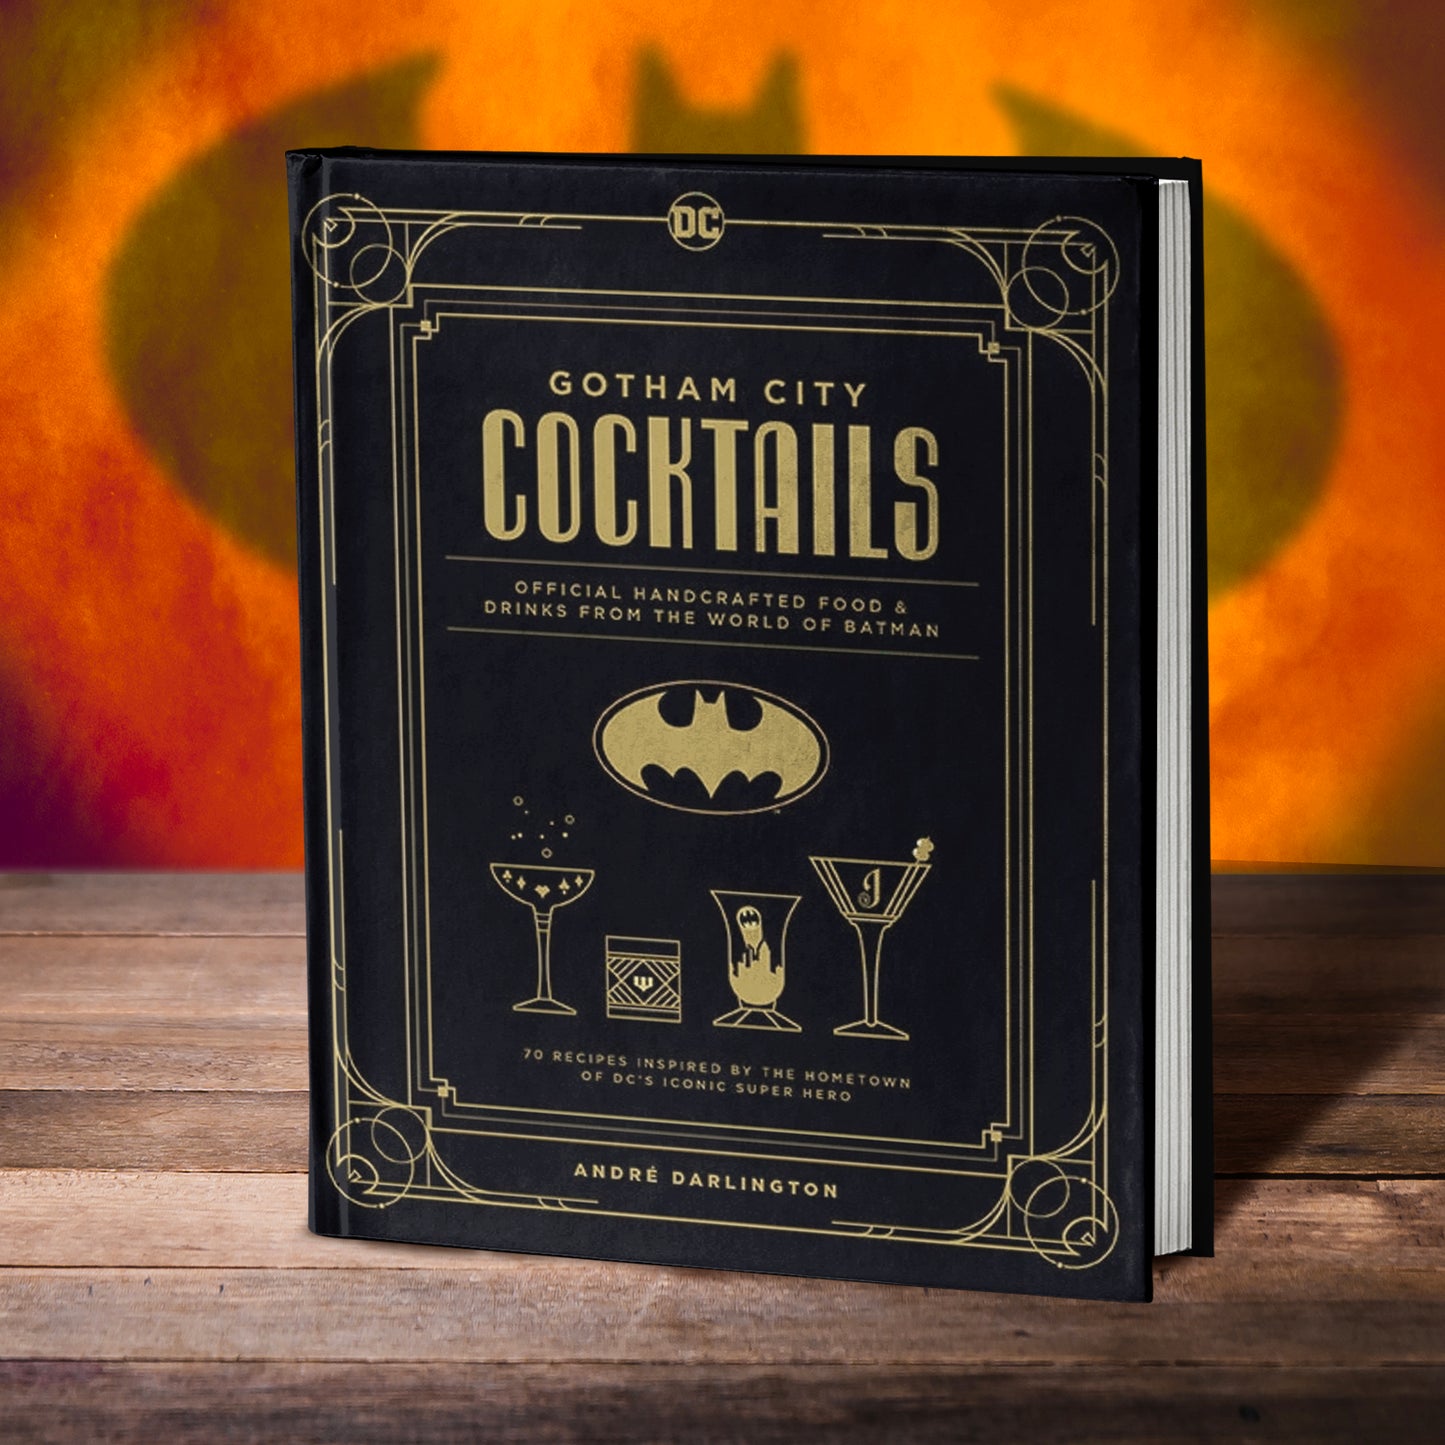 A black book on a wooden table.. Around the edges of the cover is an Art Deco border in yellow. Yellow text says "gotham city cocktails: official handcrafted food and drinks from the world of batman." Under the title is the Batman logo in yellow. At the bottom are line drawings of cocktail glasses. In the background is an orange and red wall, with a shadowy Batman symbol in the center.